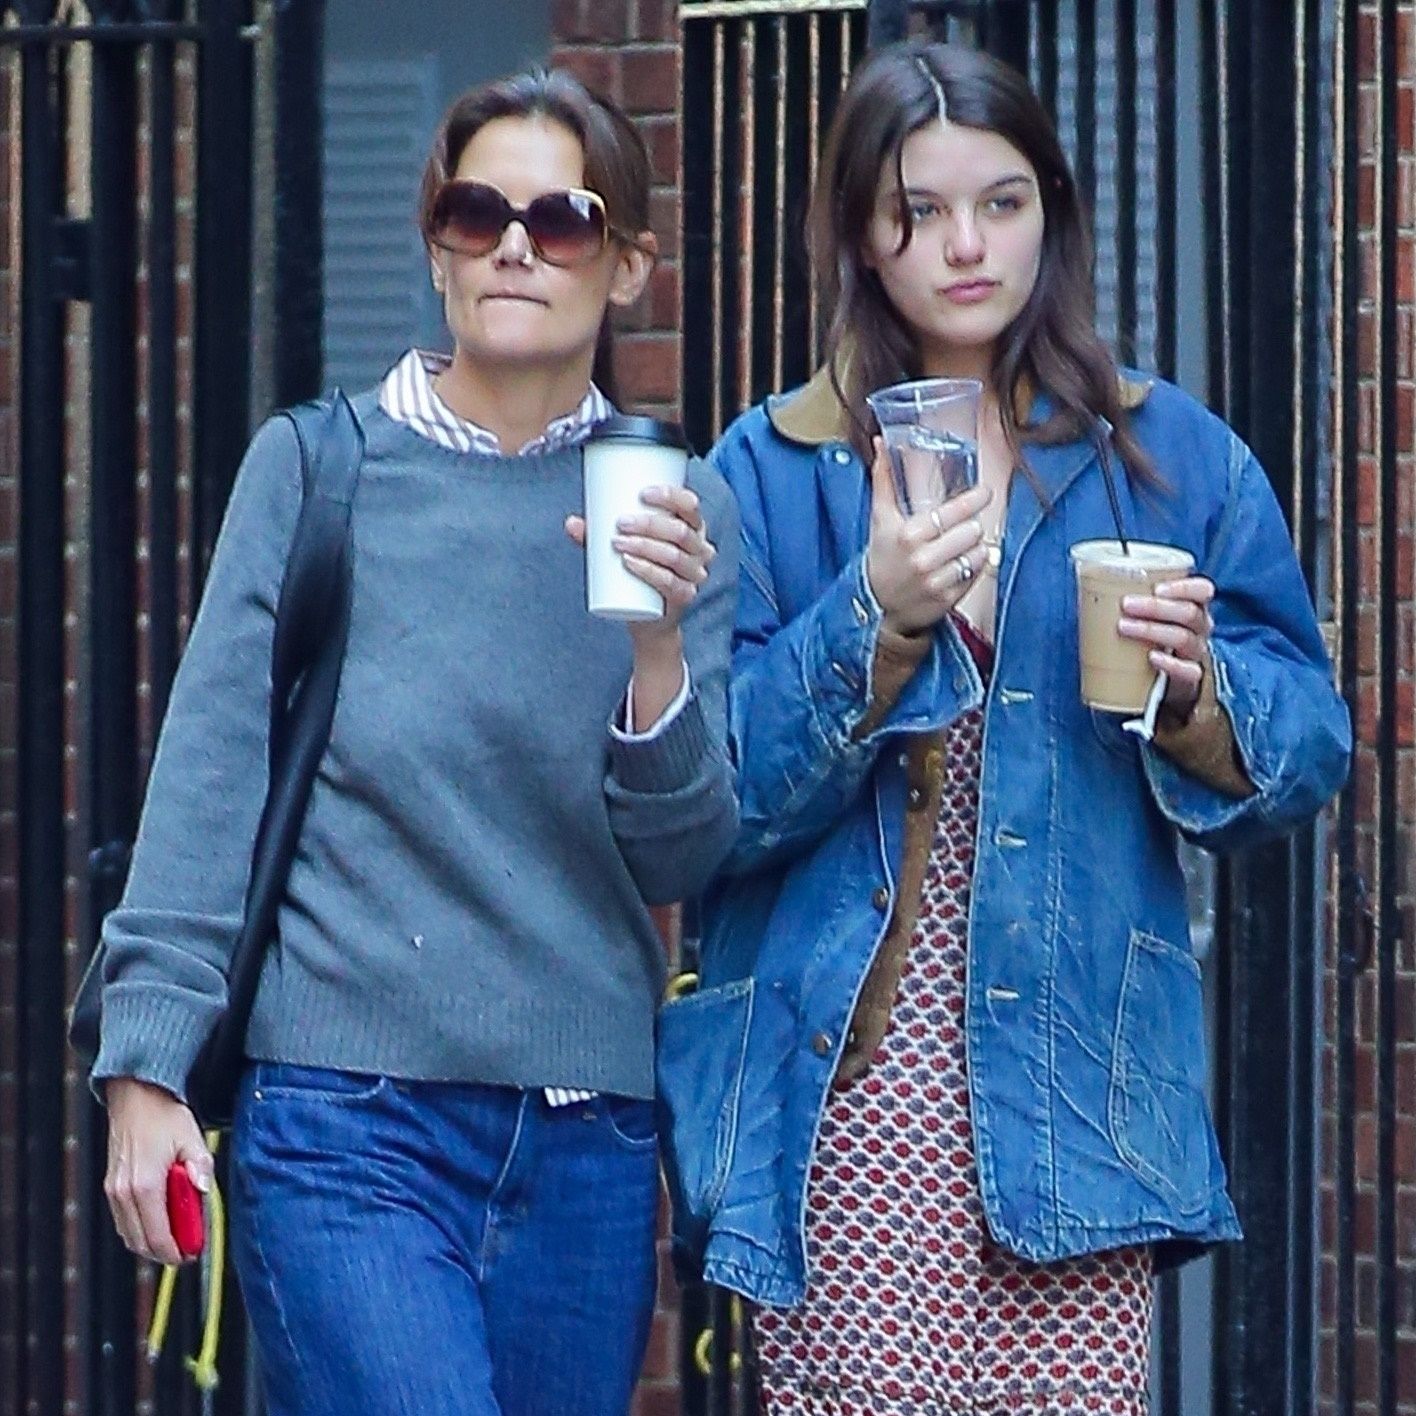 Suri Cruise Takes a Note Out of Mom Katie Holmes's Playbook in a Flowy Boho Dress